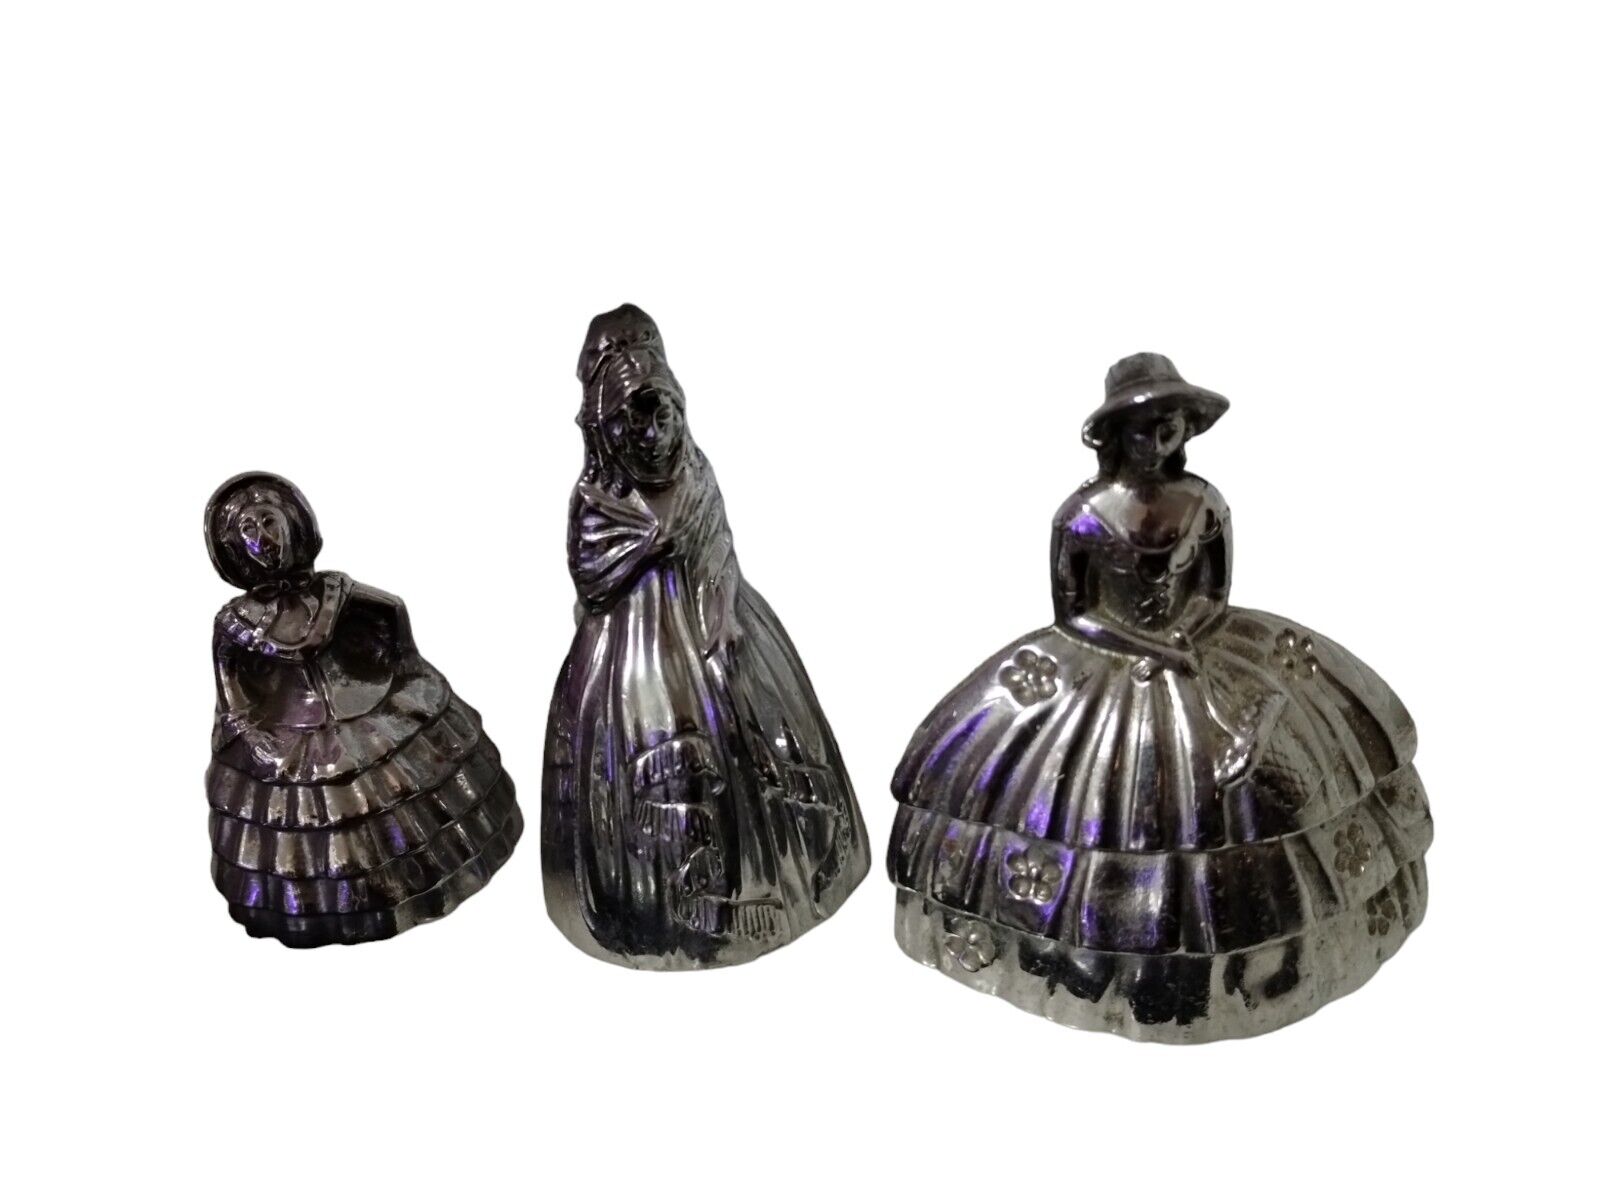 VINTAGE VICTORIAN WOMEN SILVER TONE METAL FIGURINES LOT OF 3 MADE IN ENGLAND 